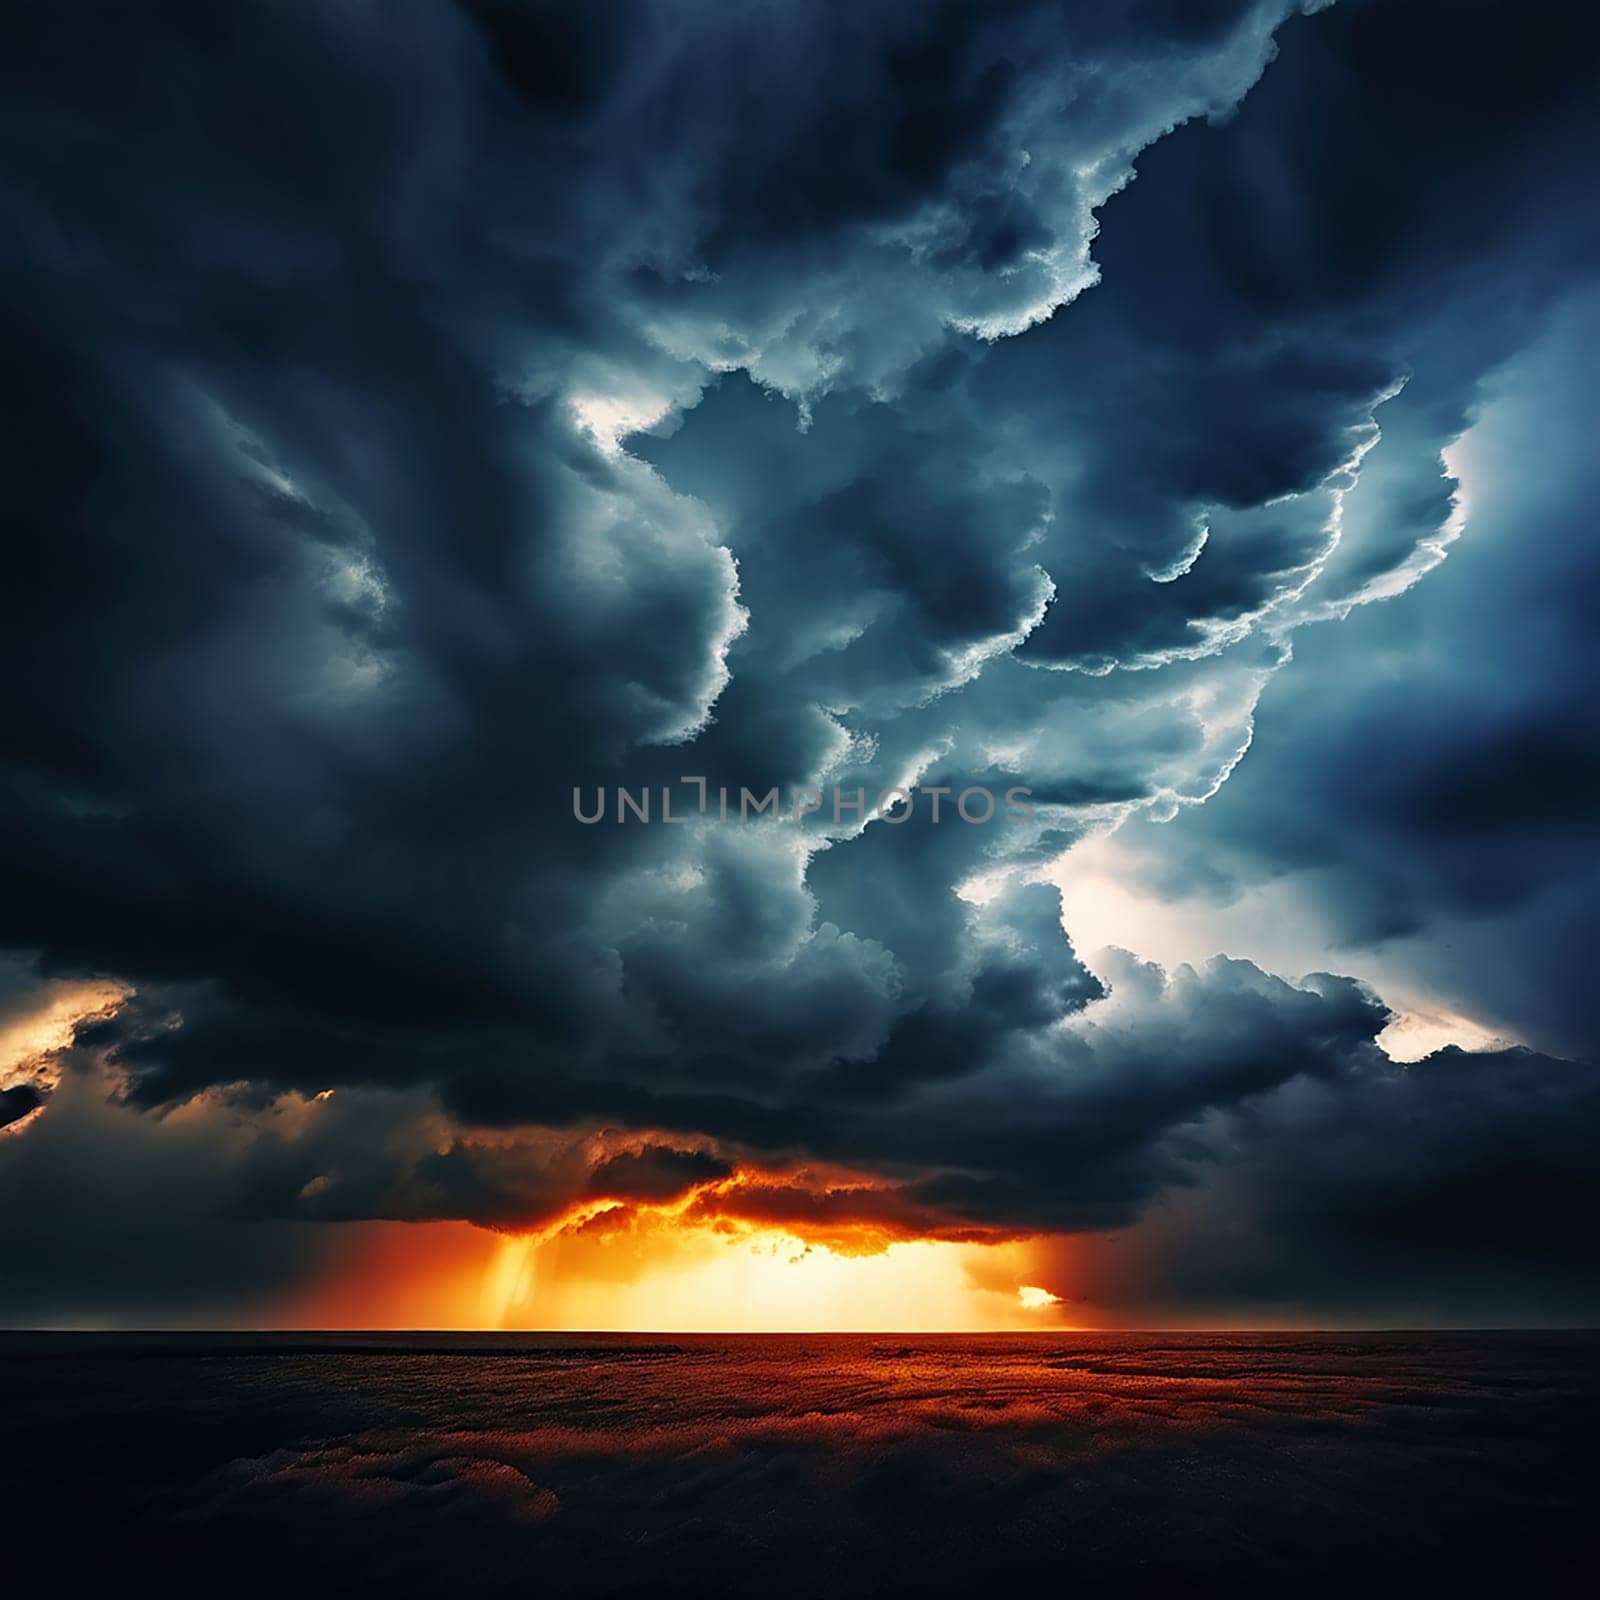 Ethereal Drama: Capturing the Majesty of Stormy Skies